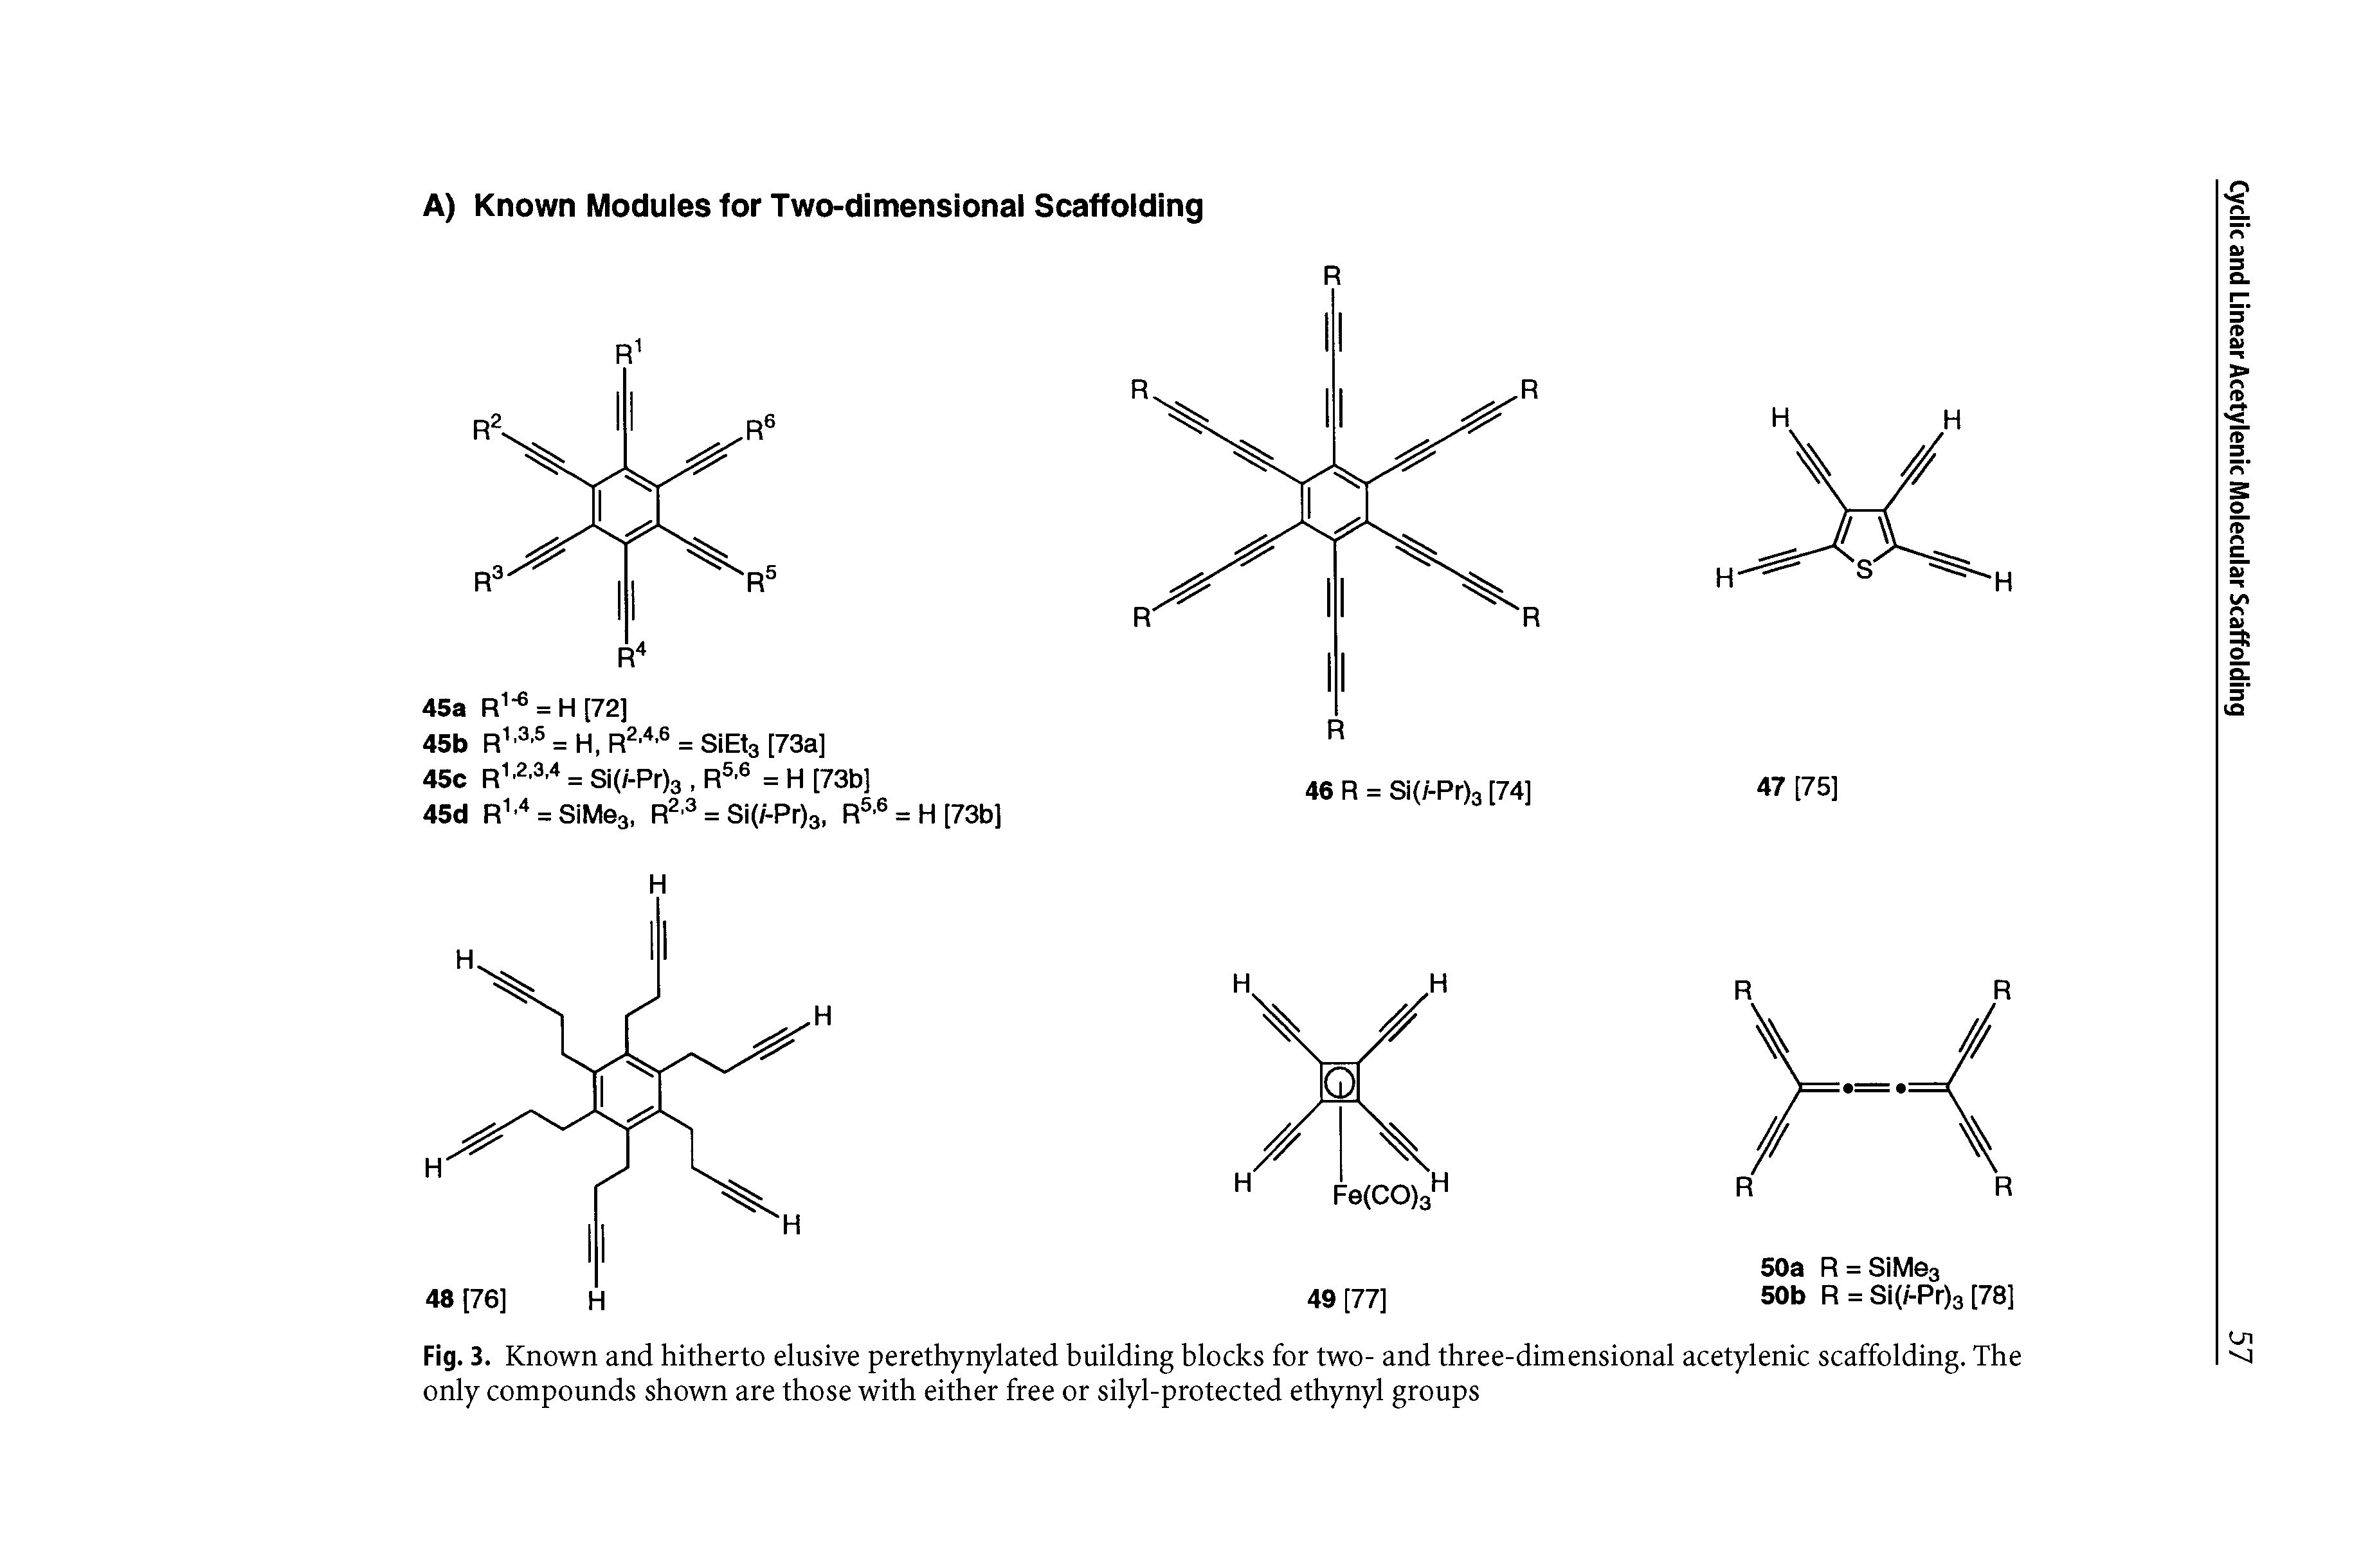 Fig. 3. Known and hitherto elusive perethynylated building blocks for two- and three-dimensional acetylenic scaffolding. The only compounds shown are those with either free or silyl-protected ethynyl groups...